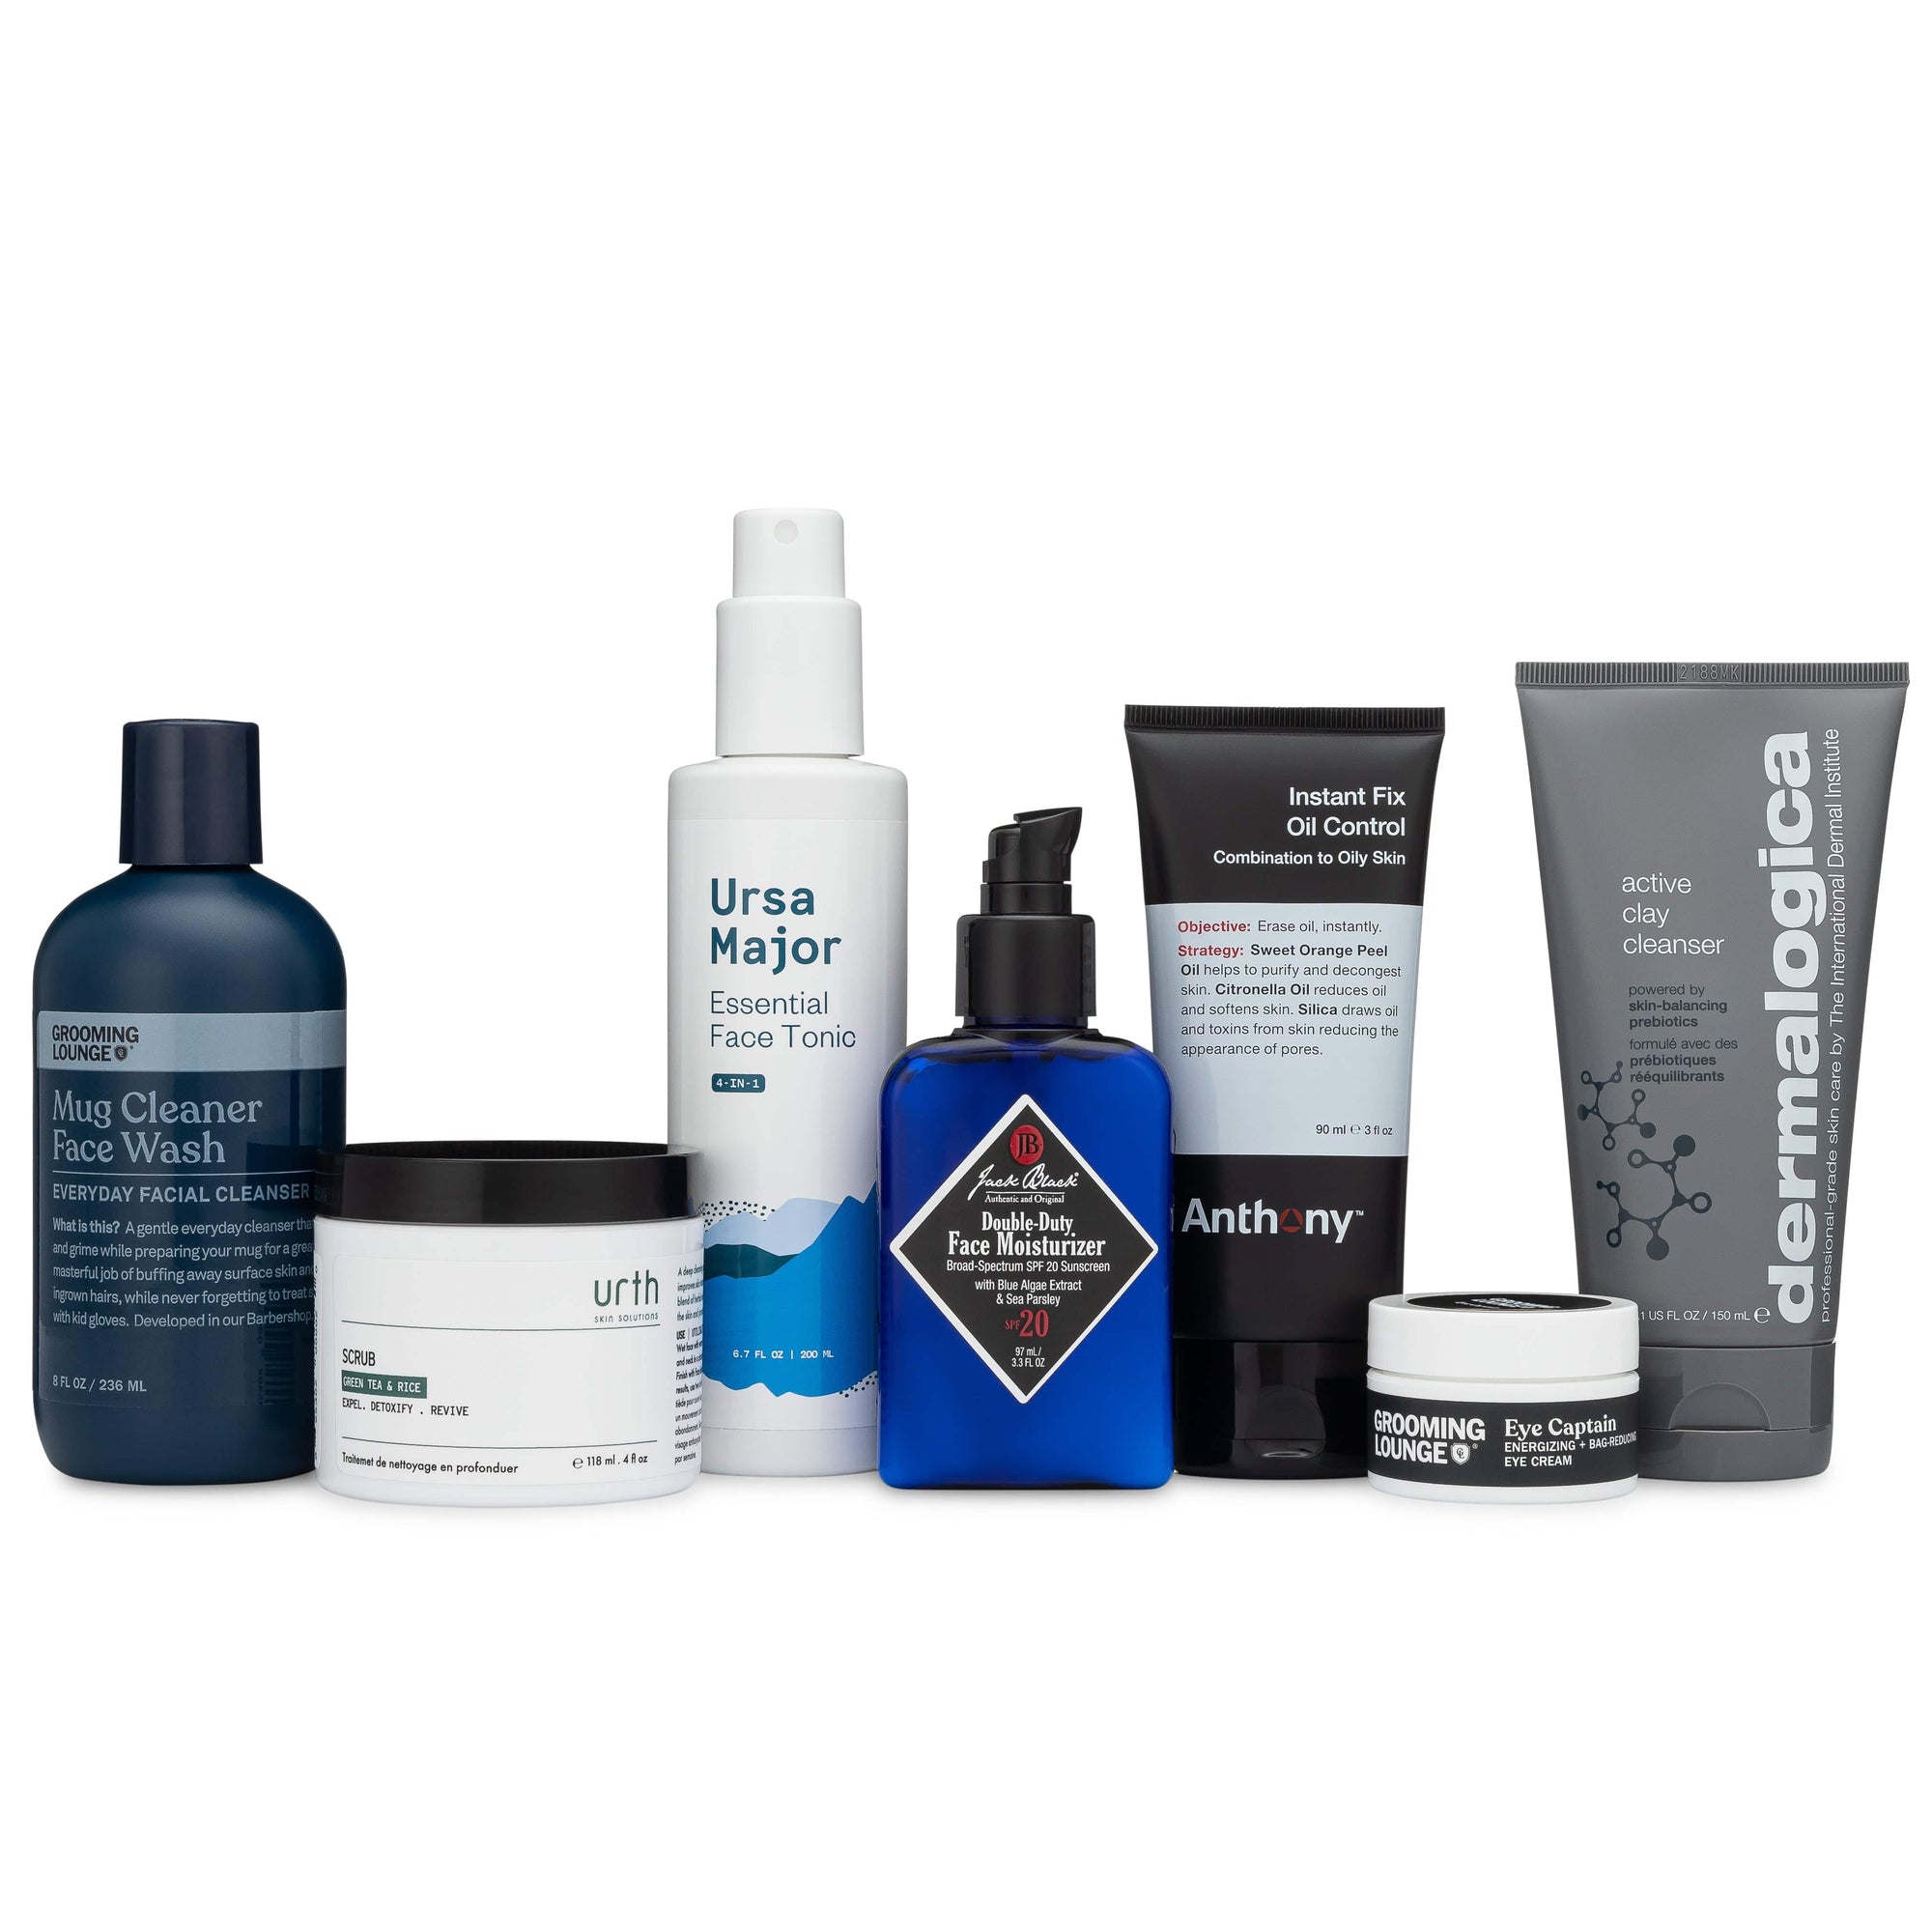 The Best-Of Skincare Kit (For Oily/Acne-Prone Skin) - Grooming Lounge